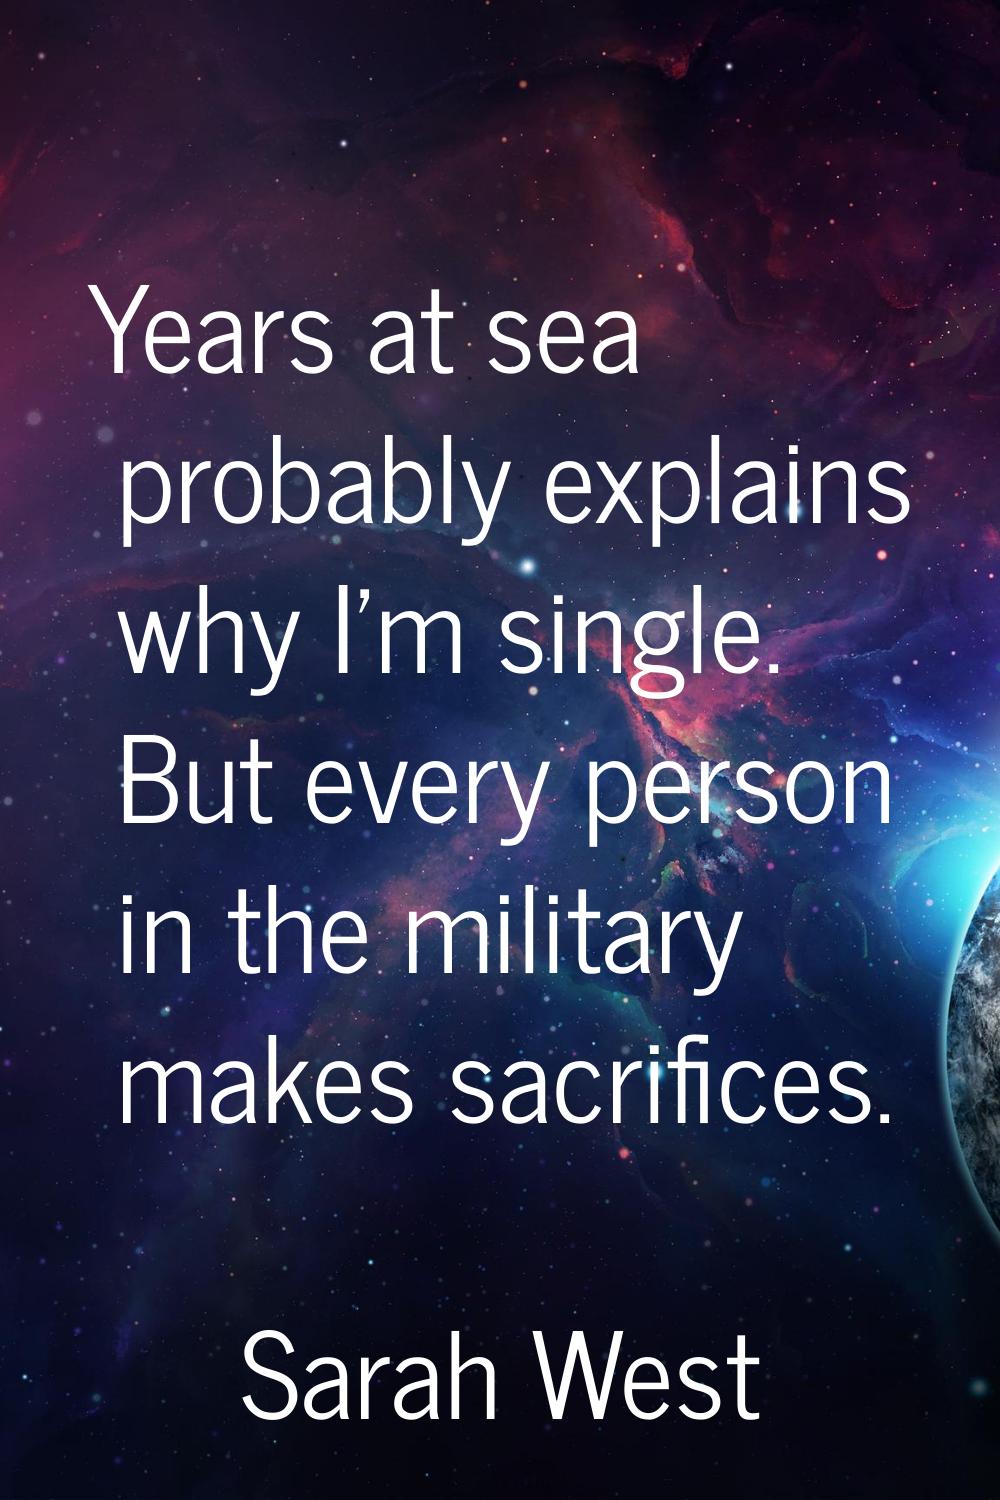 Years at sea probably explains why I'm single. But every person in the military makes sacrifices.